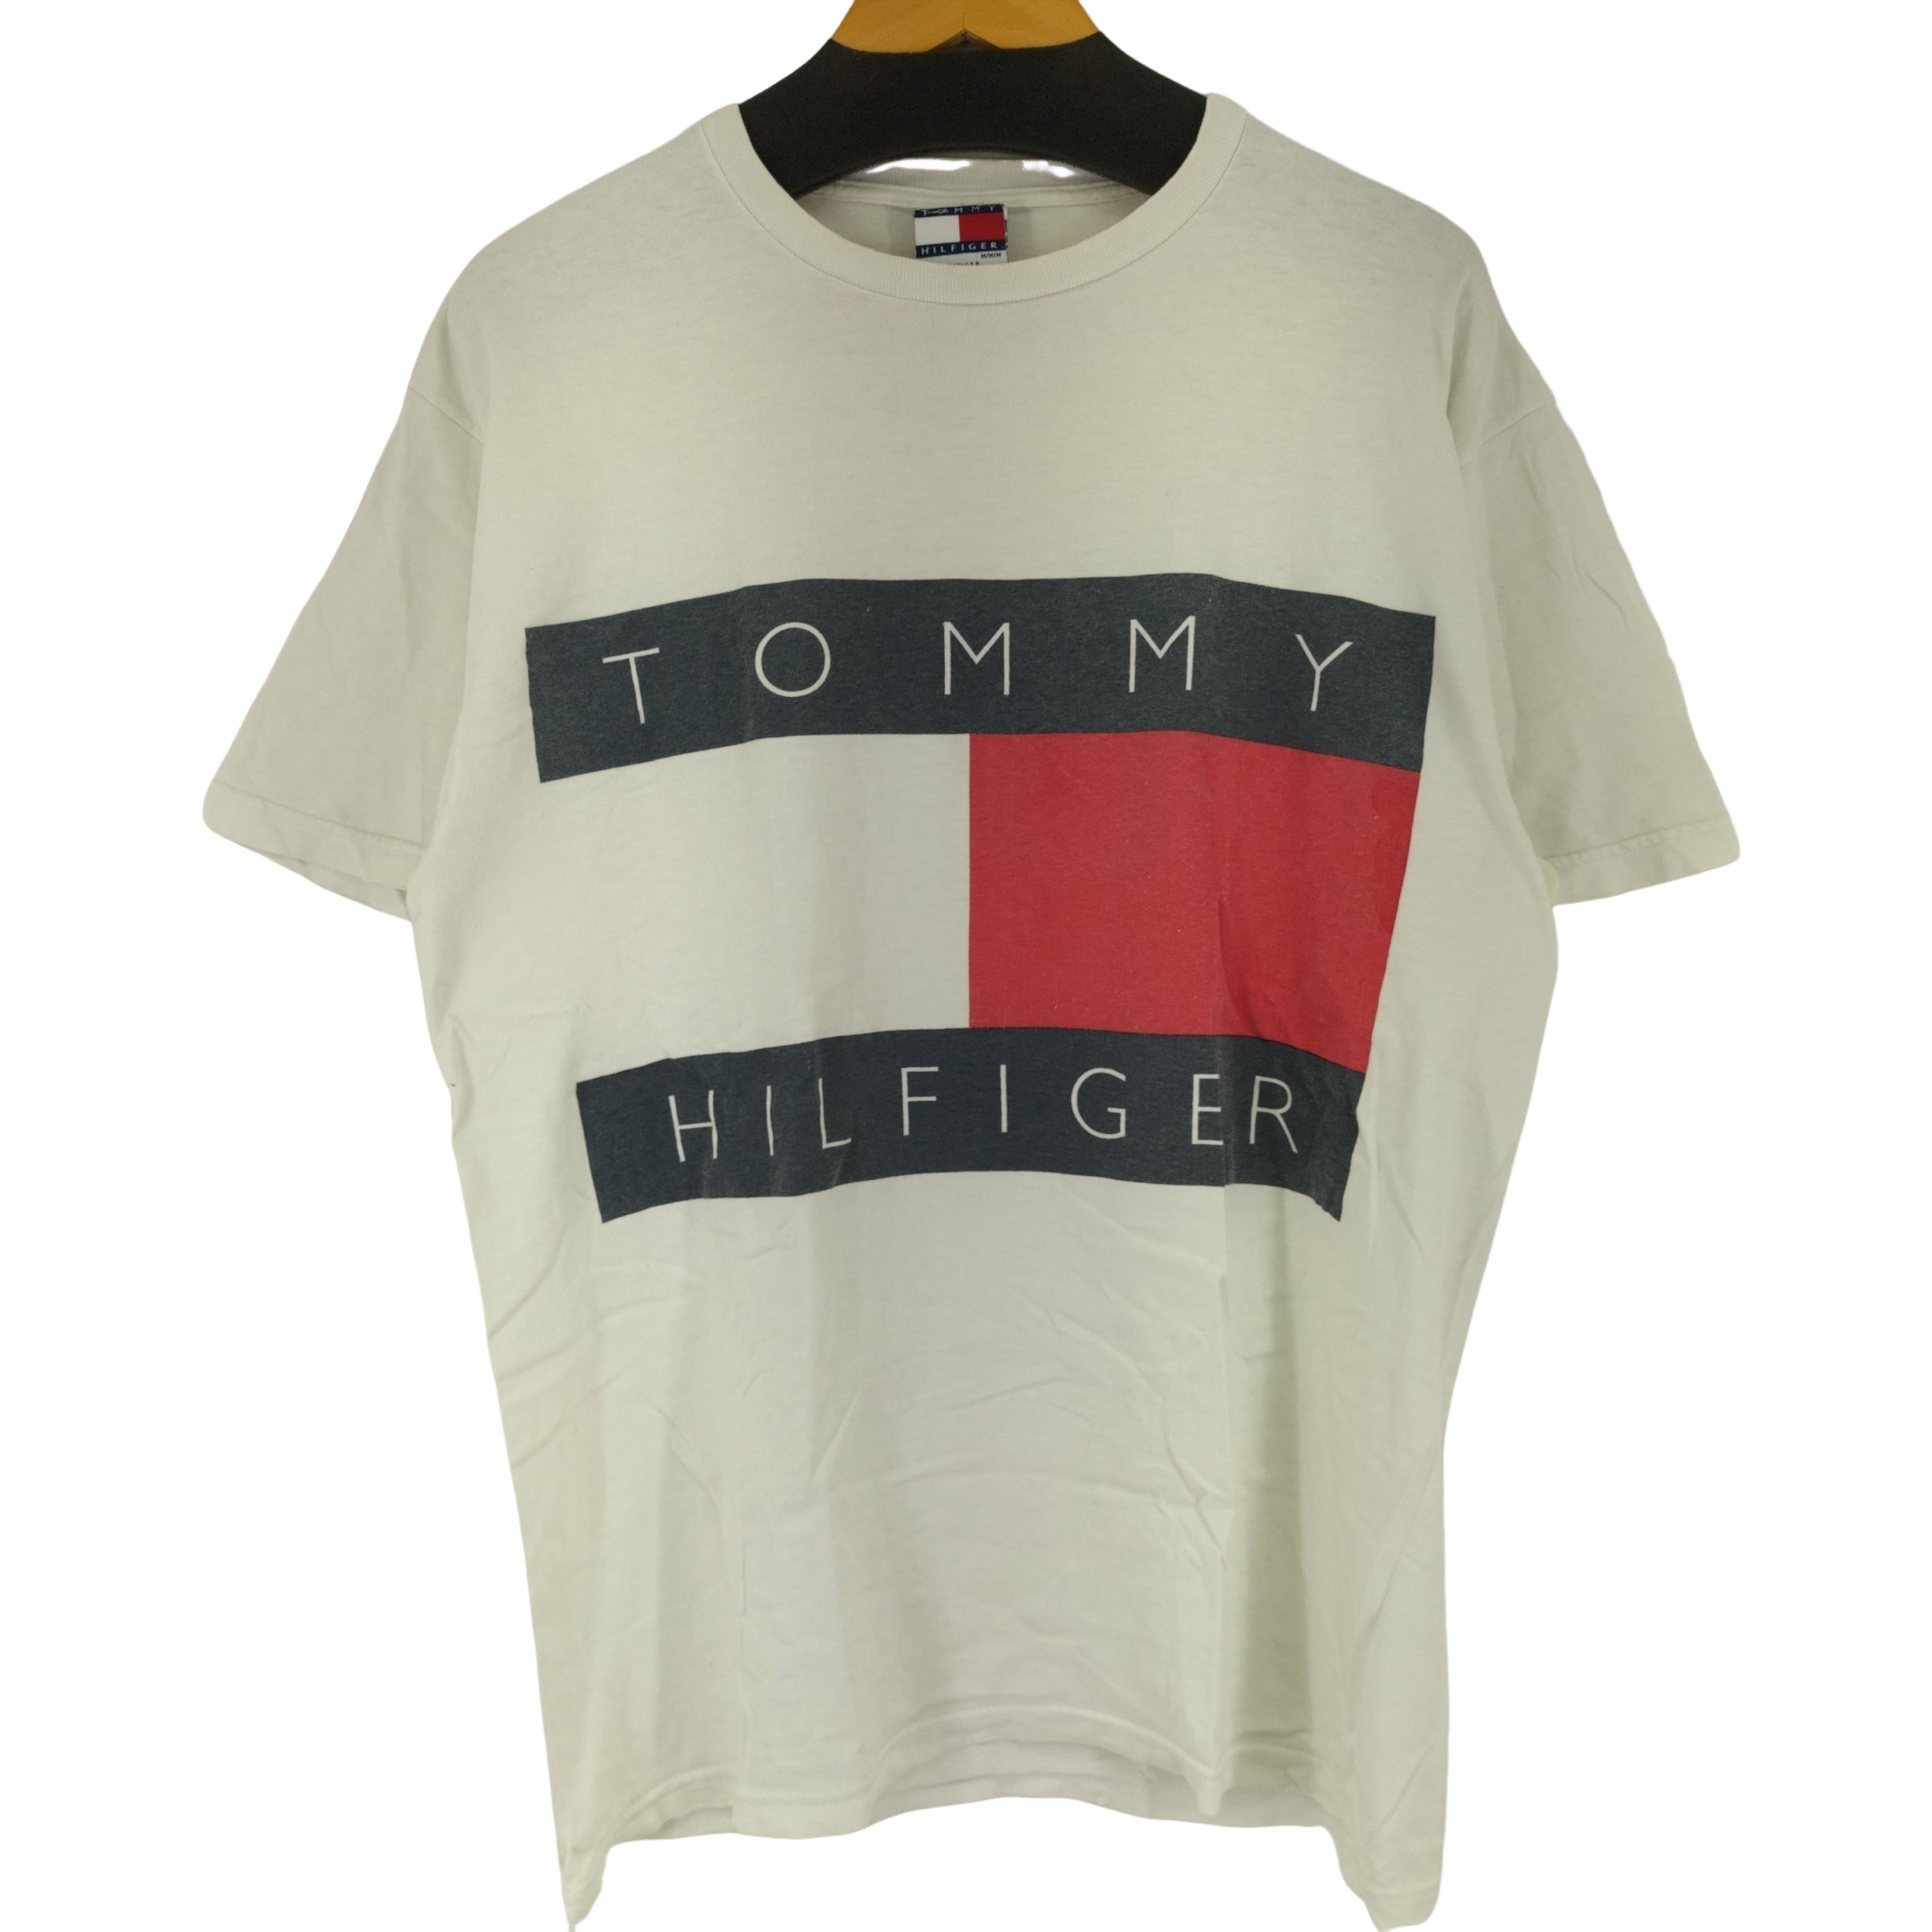 TOMMY HILFIGER(トミーヒルフィガー)90S USA製 ビッグロゴS/S TEE